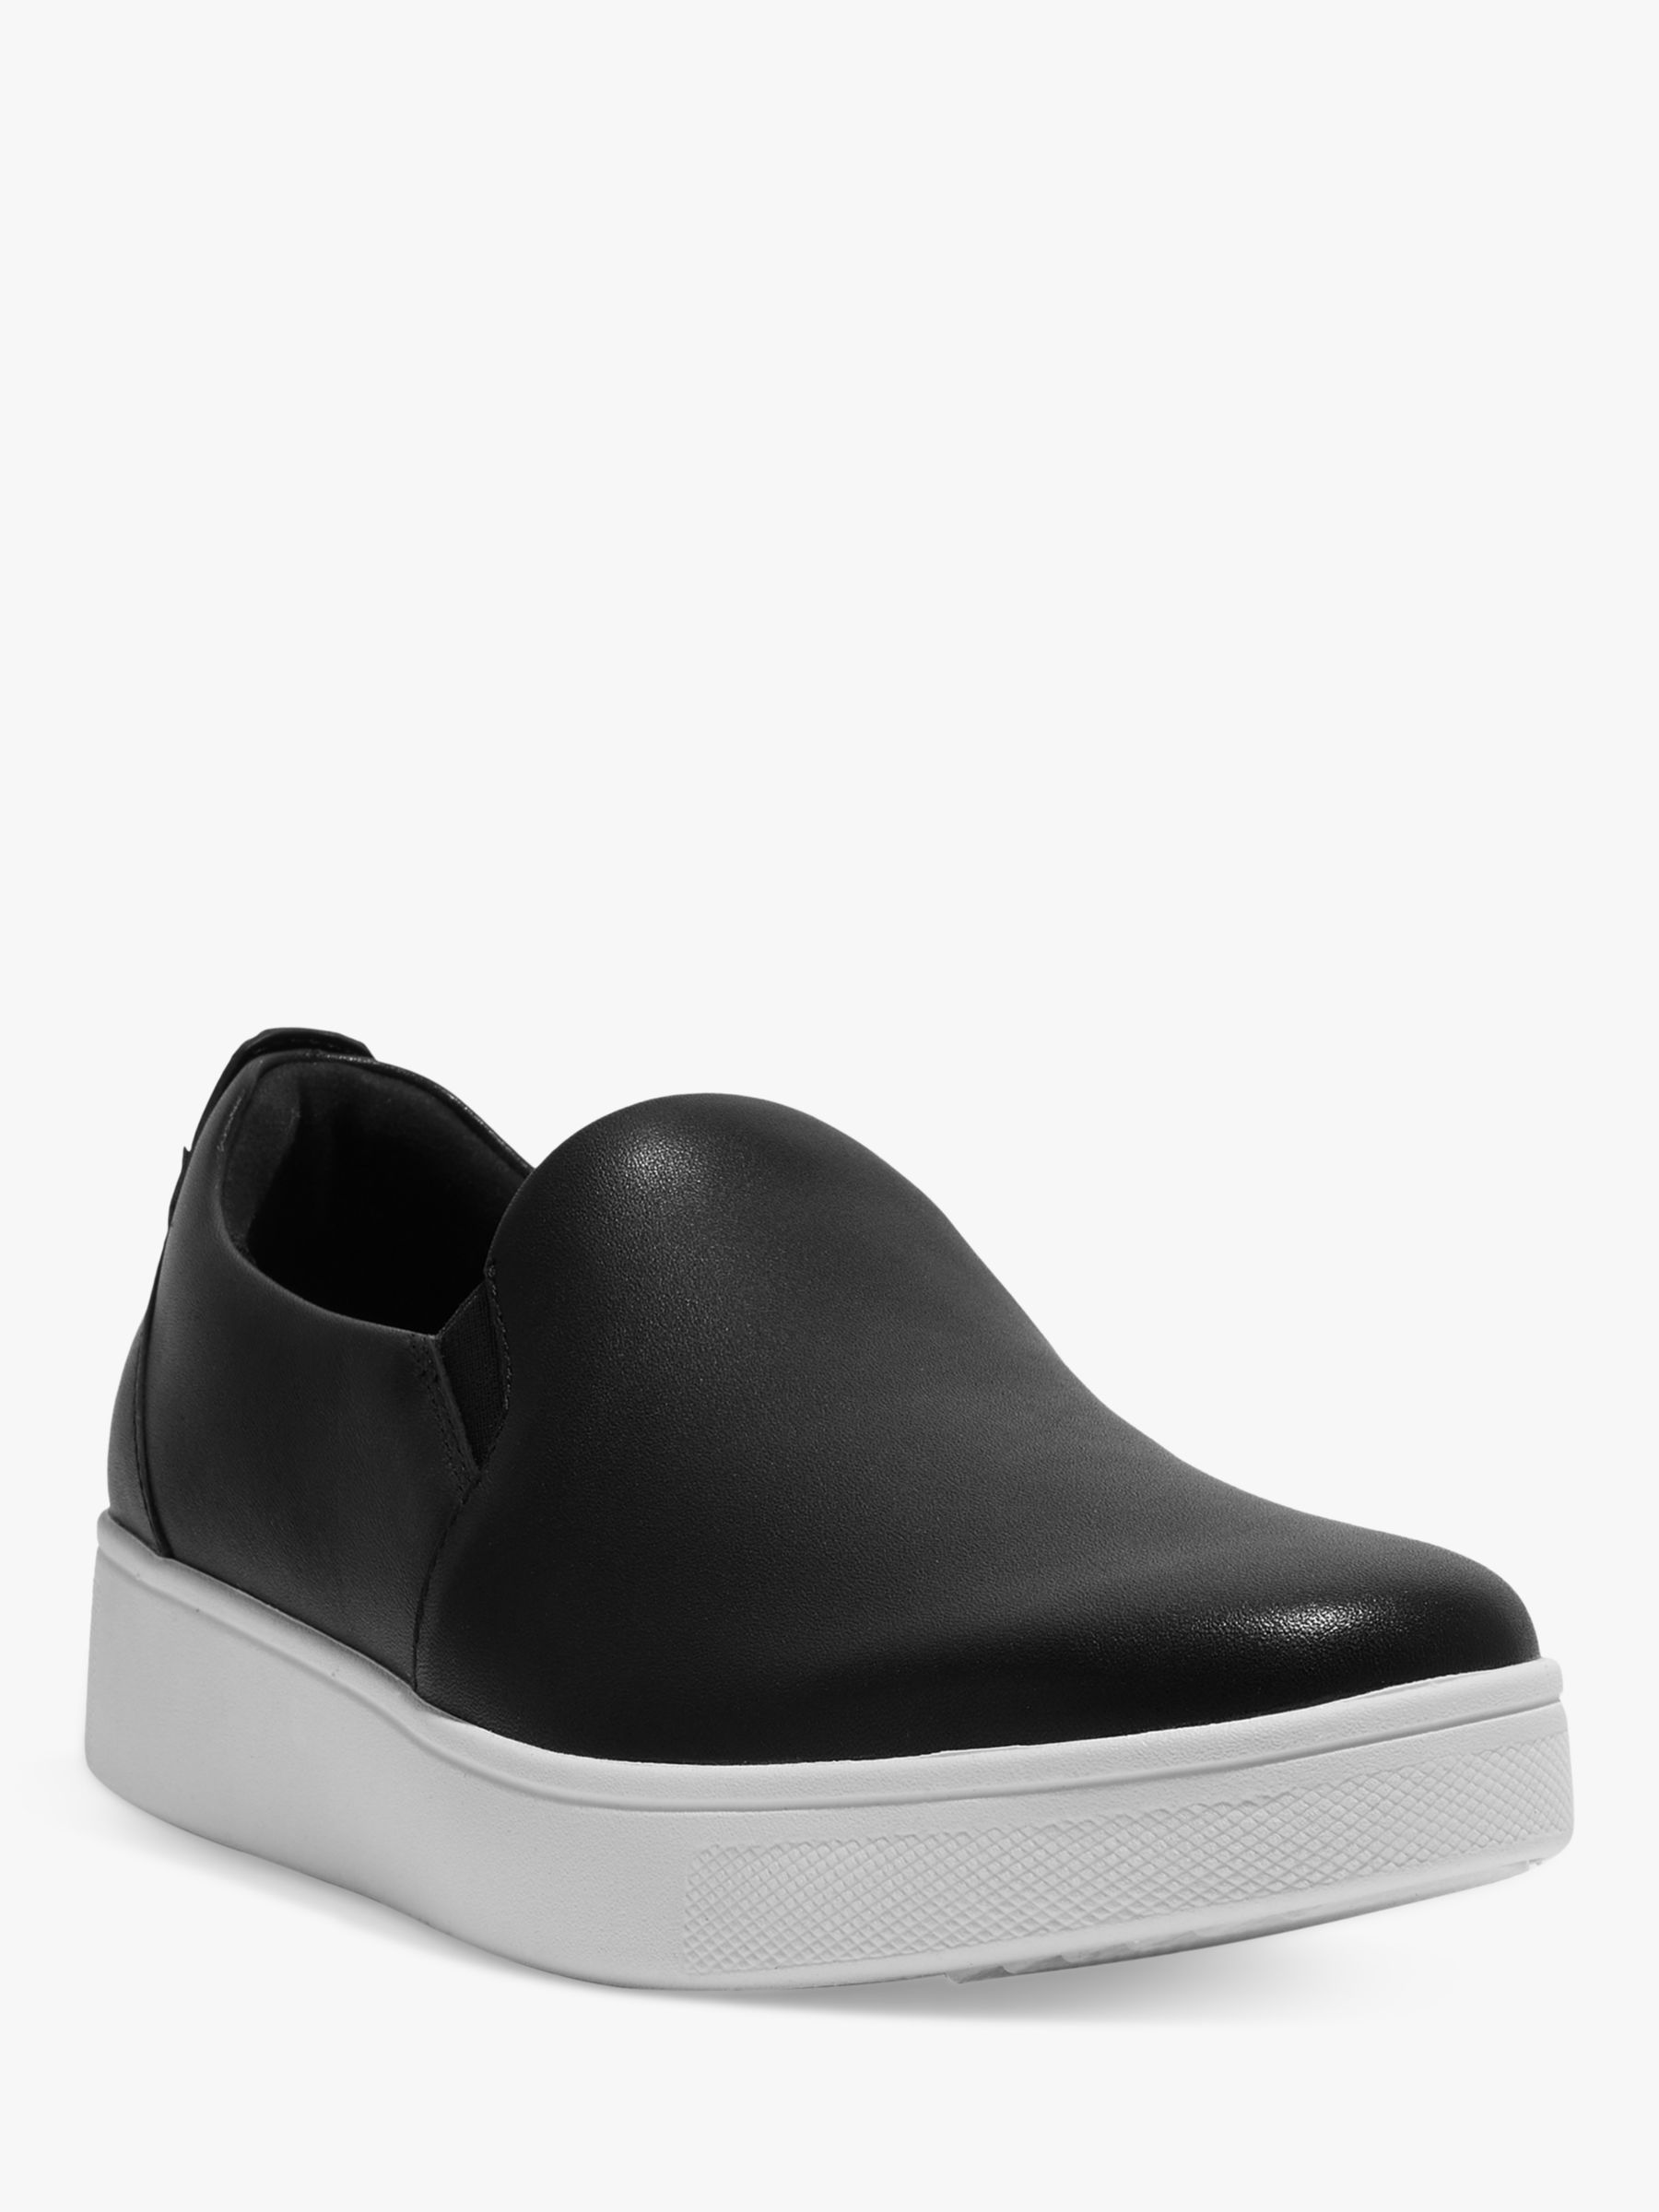 FitFlop Rally Leather Slip On Skate Trainers, Black at John Lewis ...